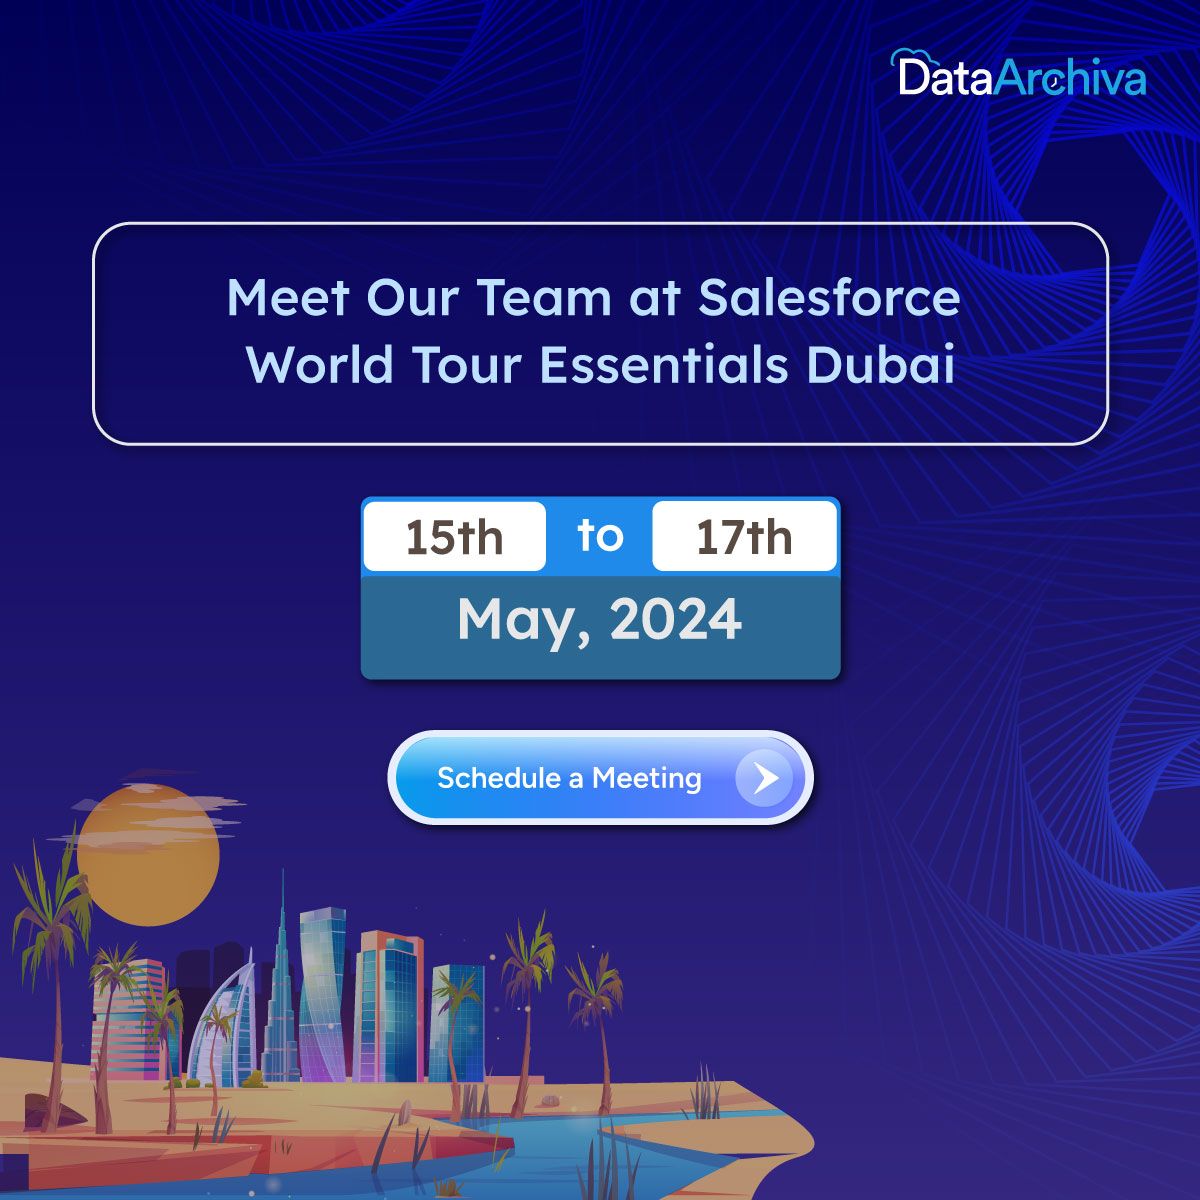 🌟 Embark on an immersive exploration of the future of business with us in Dubai at Salesforce World Tour Essentials! 🚀 Learn More ➡ buff.ly/3wtTkUf

#SalesforceTour #SalesforceWorldTour #WorldTourEssentials2024 #WorldTourEssentialsDubai #DataArchiva #DataProtection